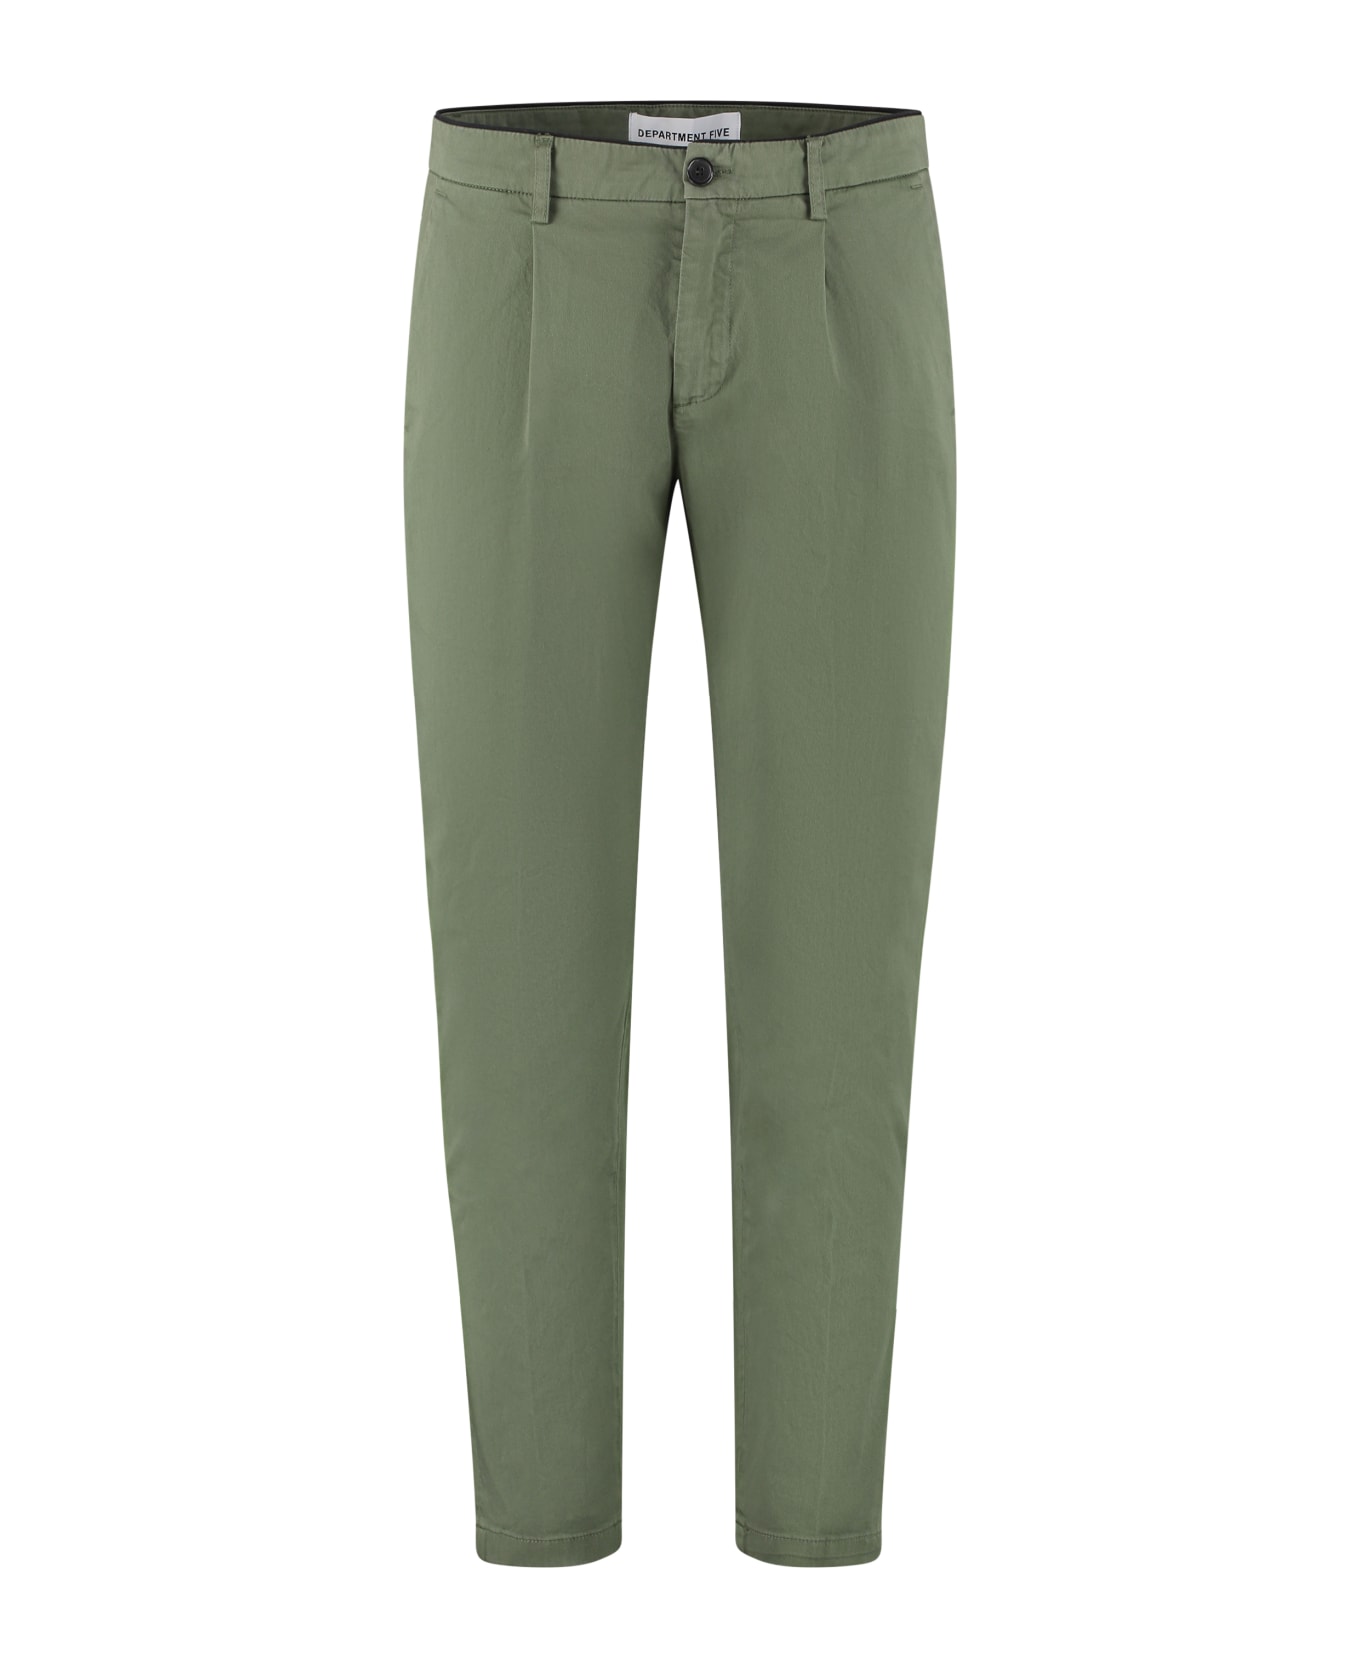 Department Five Prince Chino Pants - green ボトムス